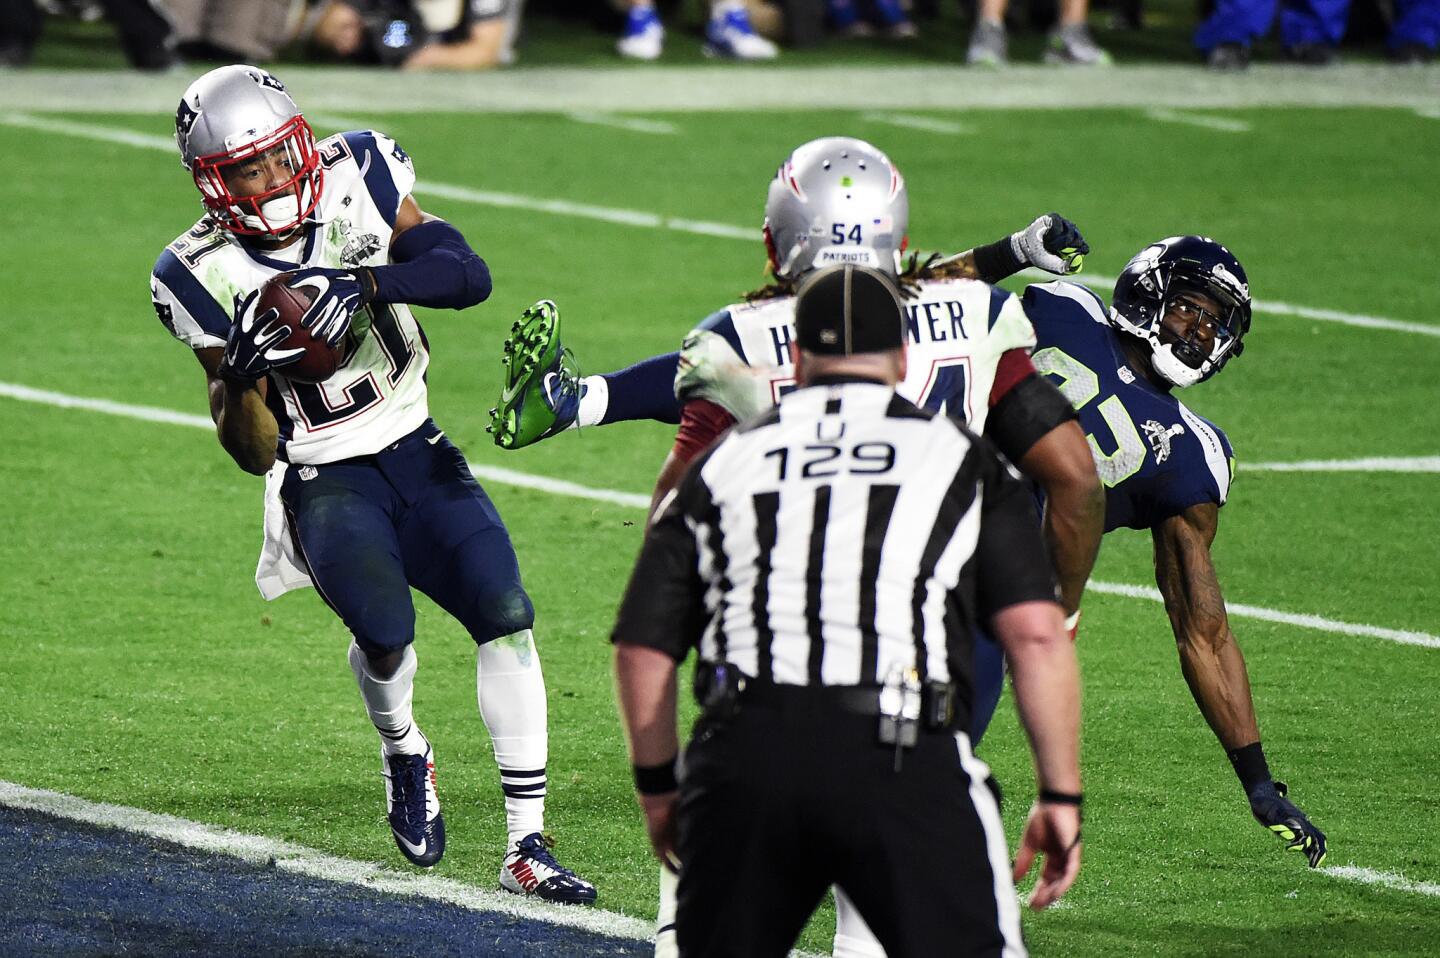 Malcolm Butler #21 of the New England Patriots makes an interception against the Seattle Seahawks in the fourth quarter during Super Bowl XLIX at University of Phoenix Stadium on February 1, 2015 in Glendale, Arizona.